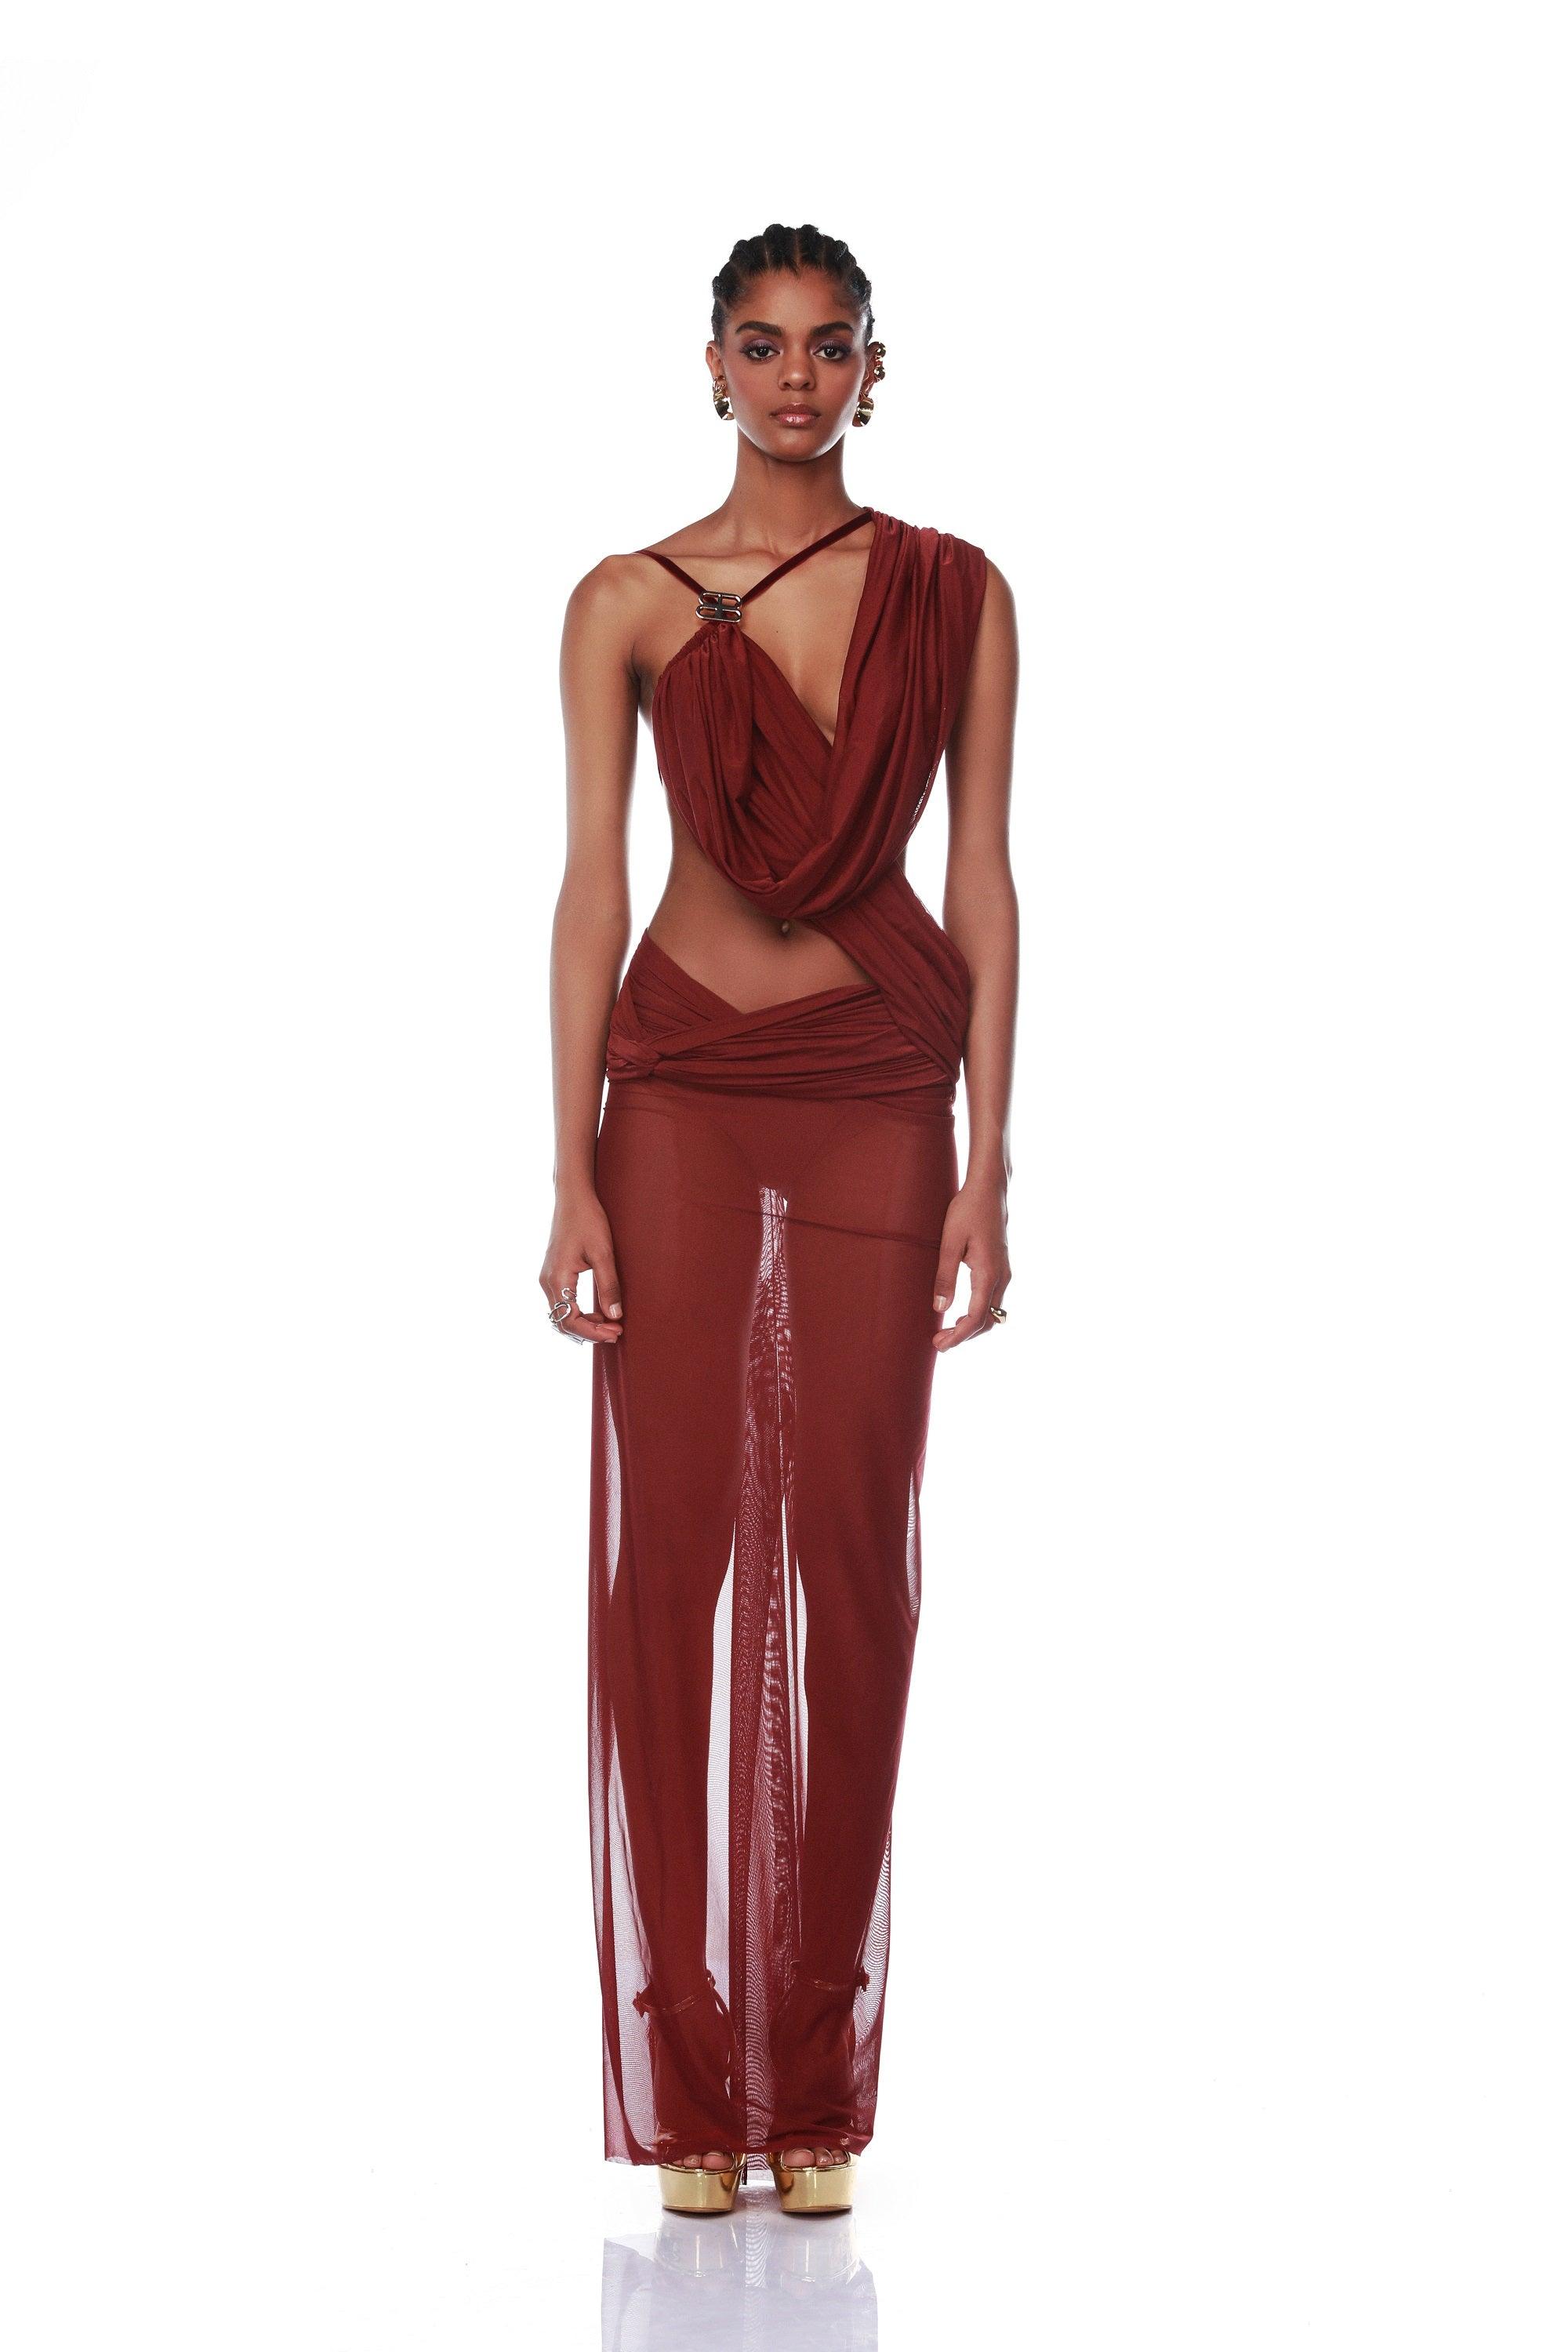 Maroonish-Red Draped Netted Bridal Gown With Elegant Arabian Tuxedo